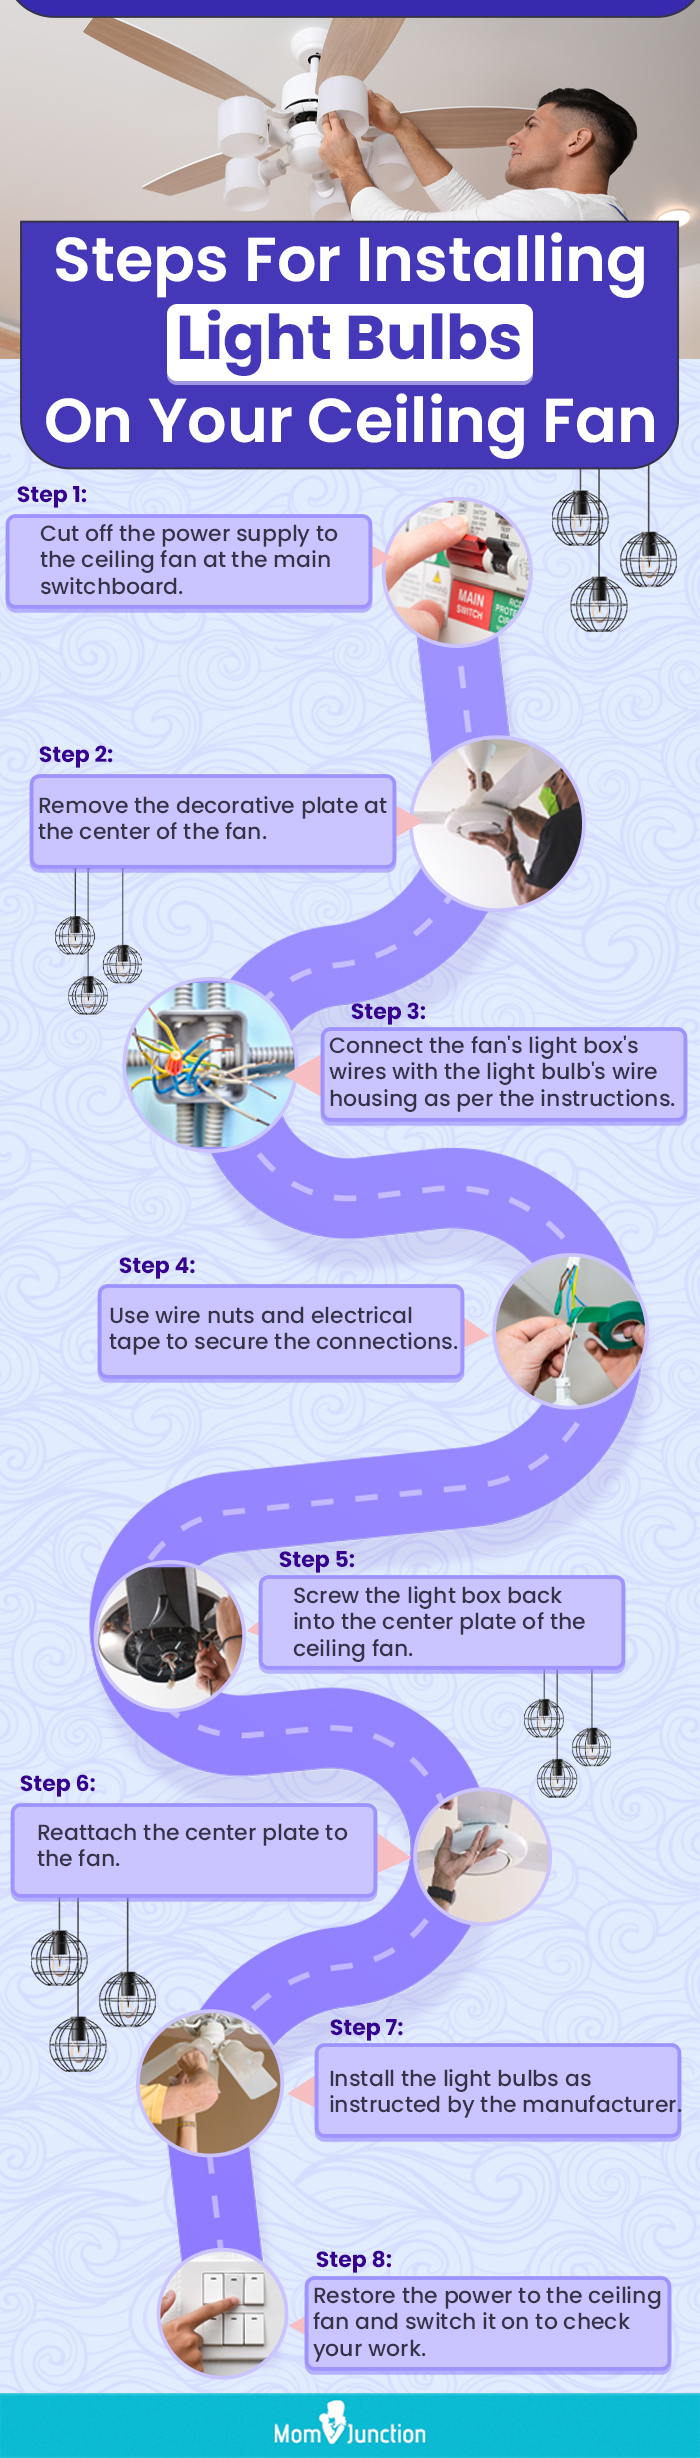 Steps For Installing Light Bulbs On Your Ceiling Fan (infographic)